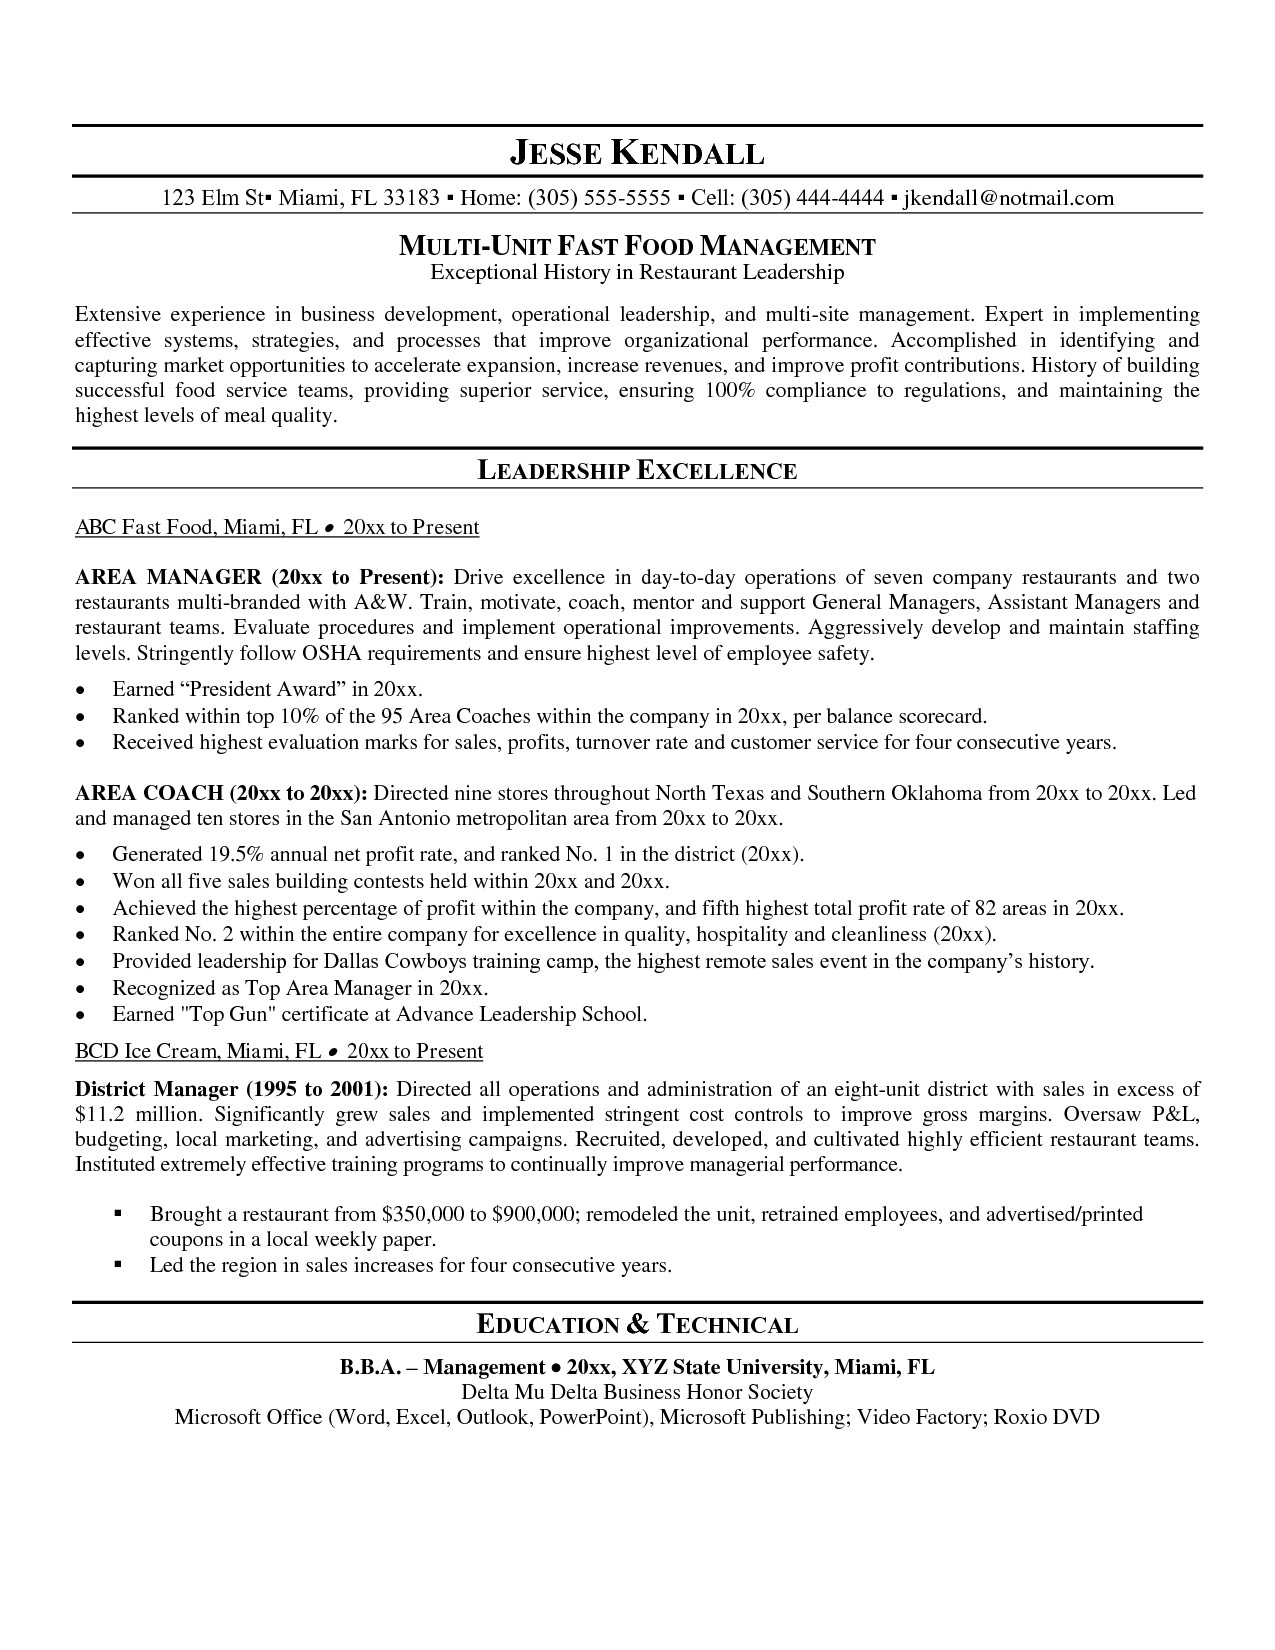 Letter From the President Of A Company Template - Resume for Nurses Template Beautiful Basic Resume Template New